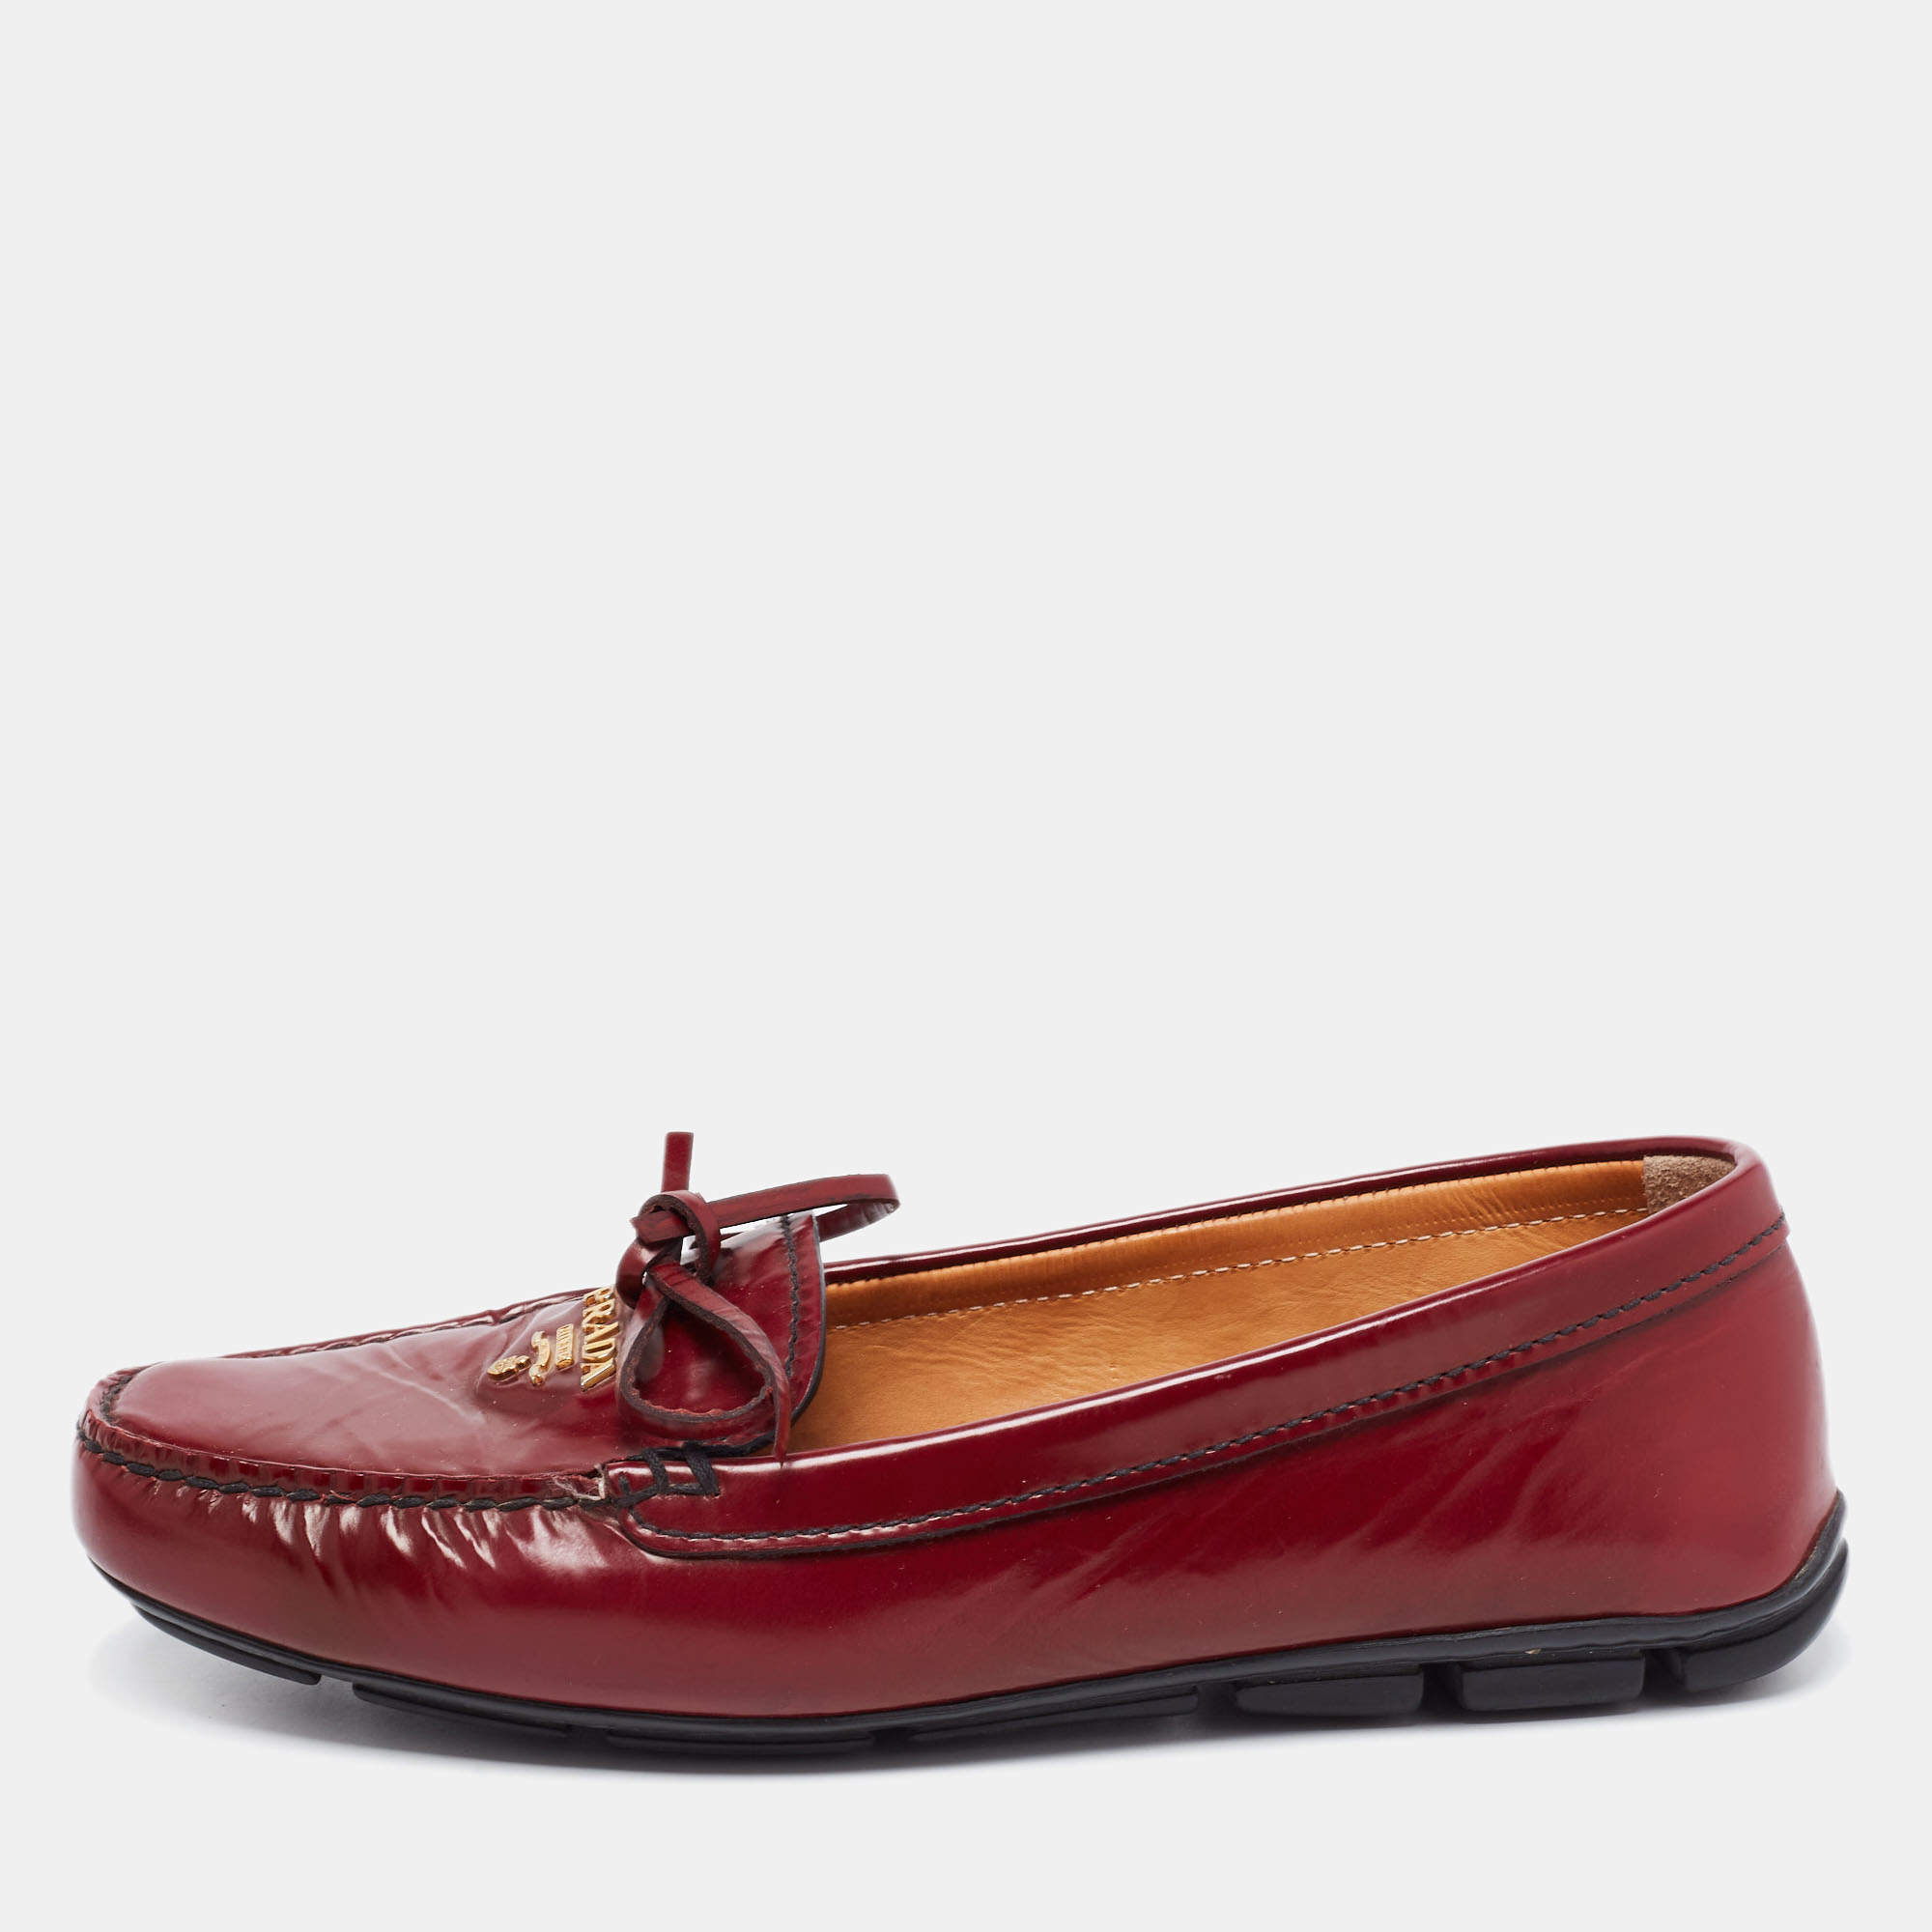 Prada Red Glossy Leather Bow Slip On Loafers Size 36